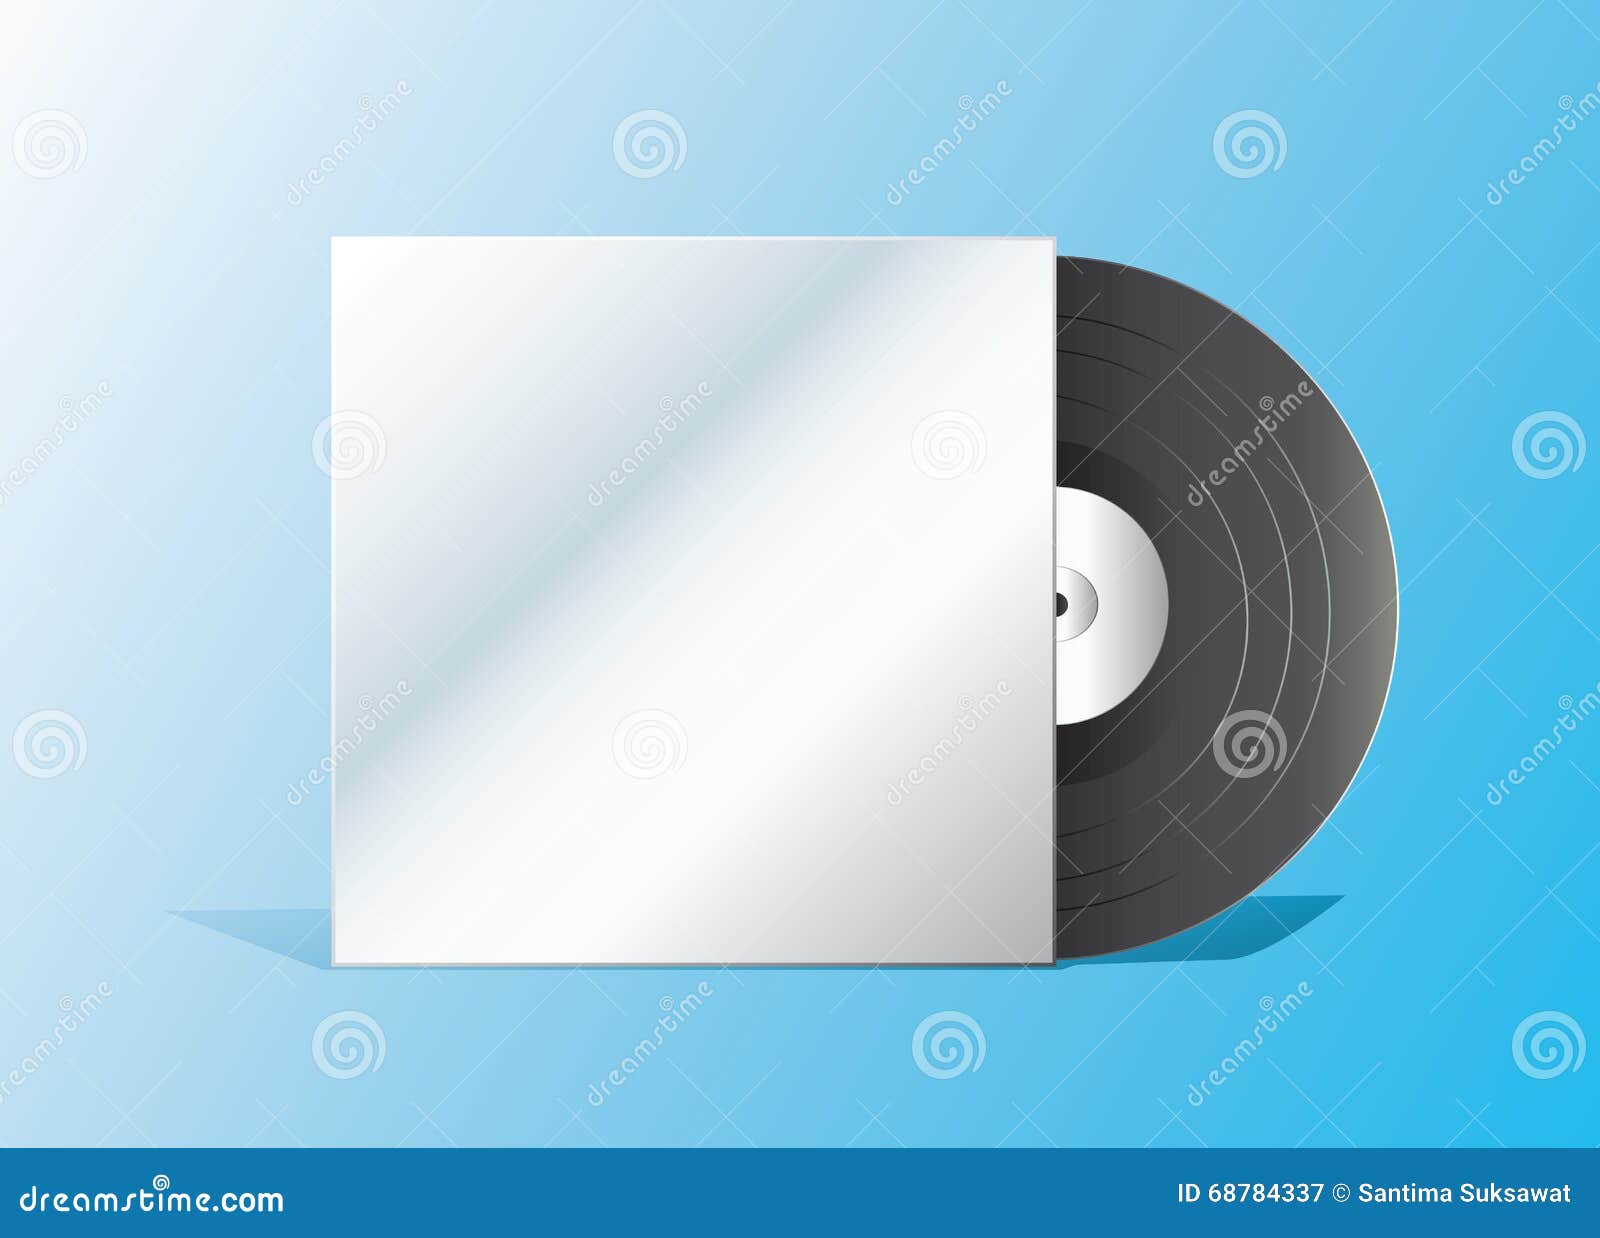 The Record With Empty Cover Stock Vector Illustration Of Black Rock 68784337